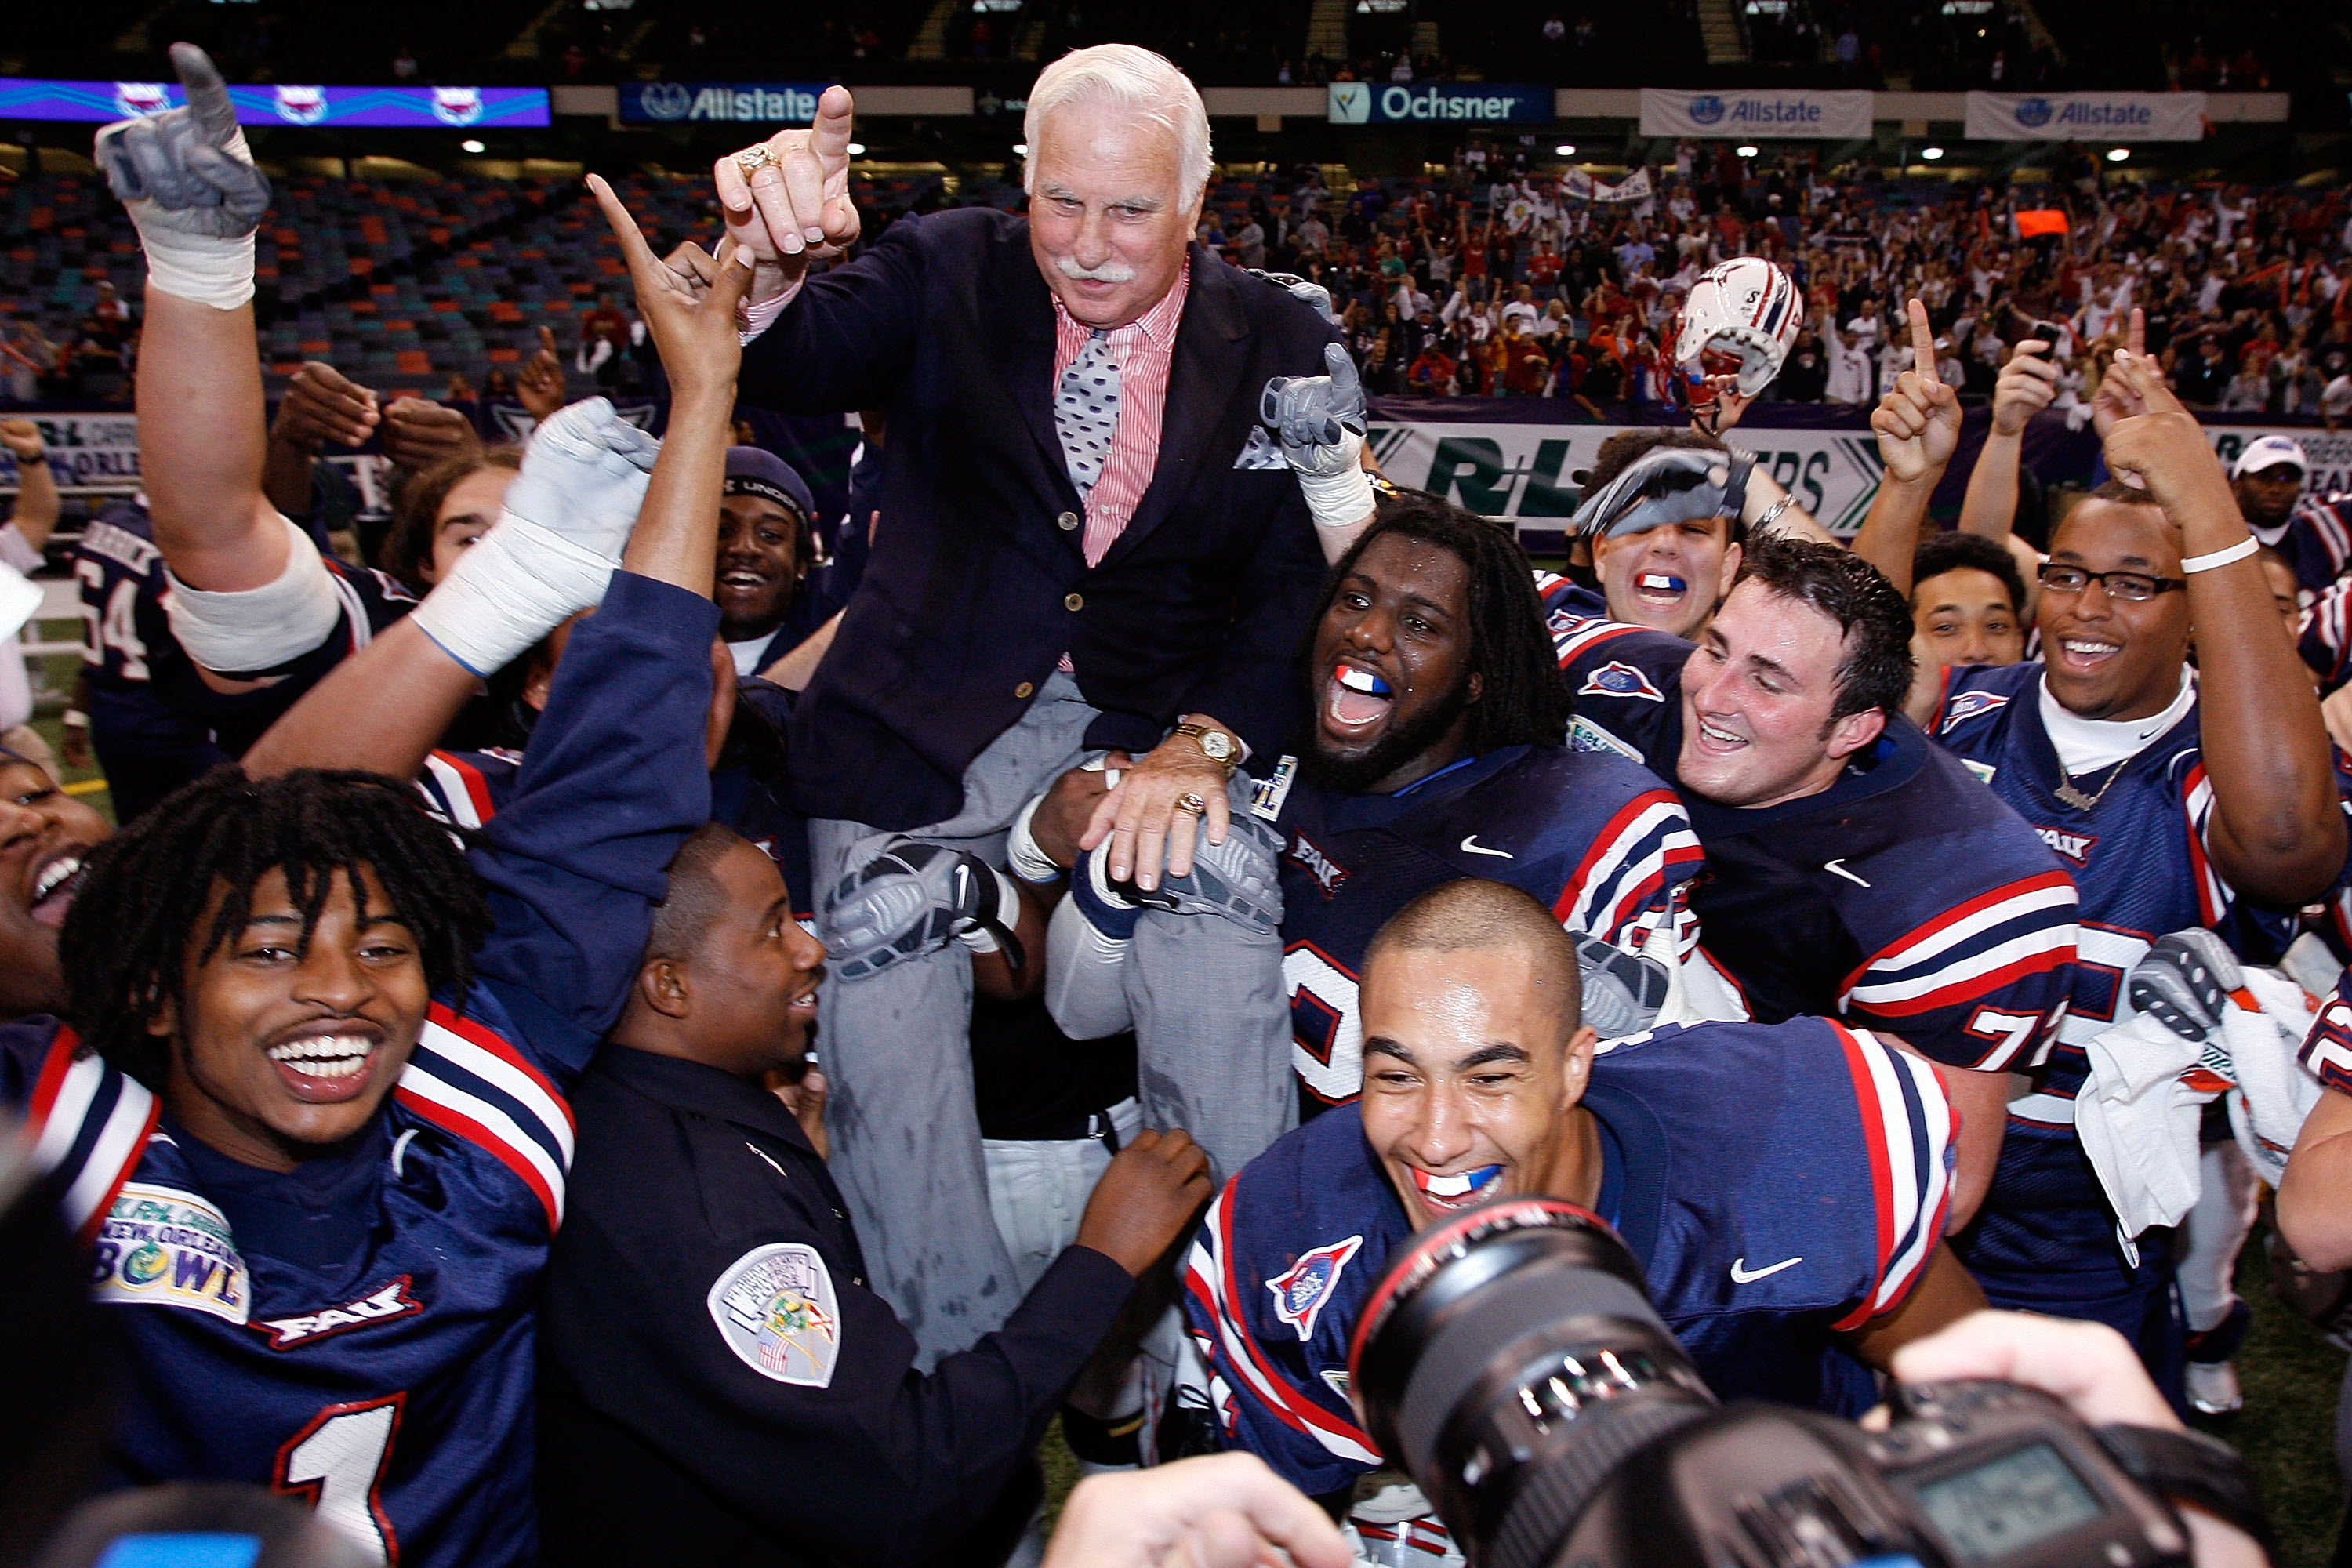 NEW ORLEANS - DECEMBER 21:  Head coach Howard Schnellenberger of the Florida Atlantic University Owls is carried on his team's shoulders after defeating the Memphis University Tigers 44-27 in the New Orleans Bowl on December 21, 2007 at the Louisiana Supe